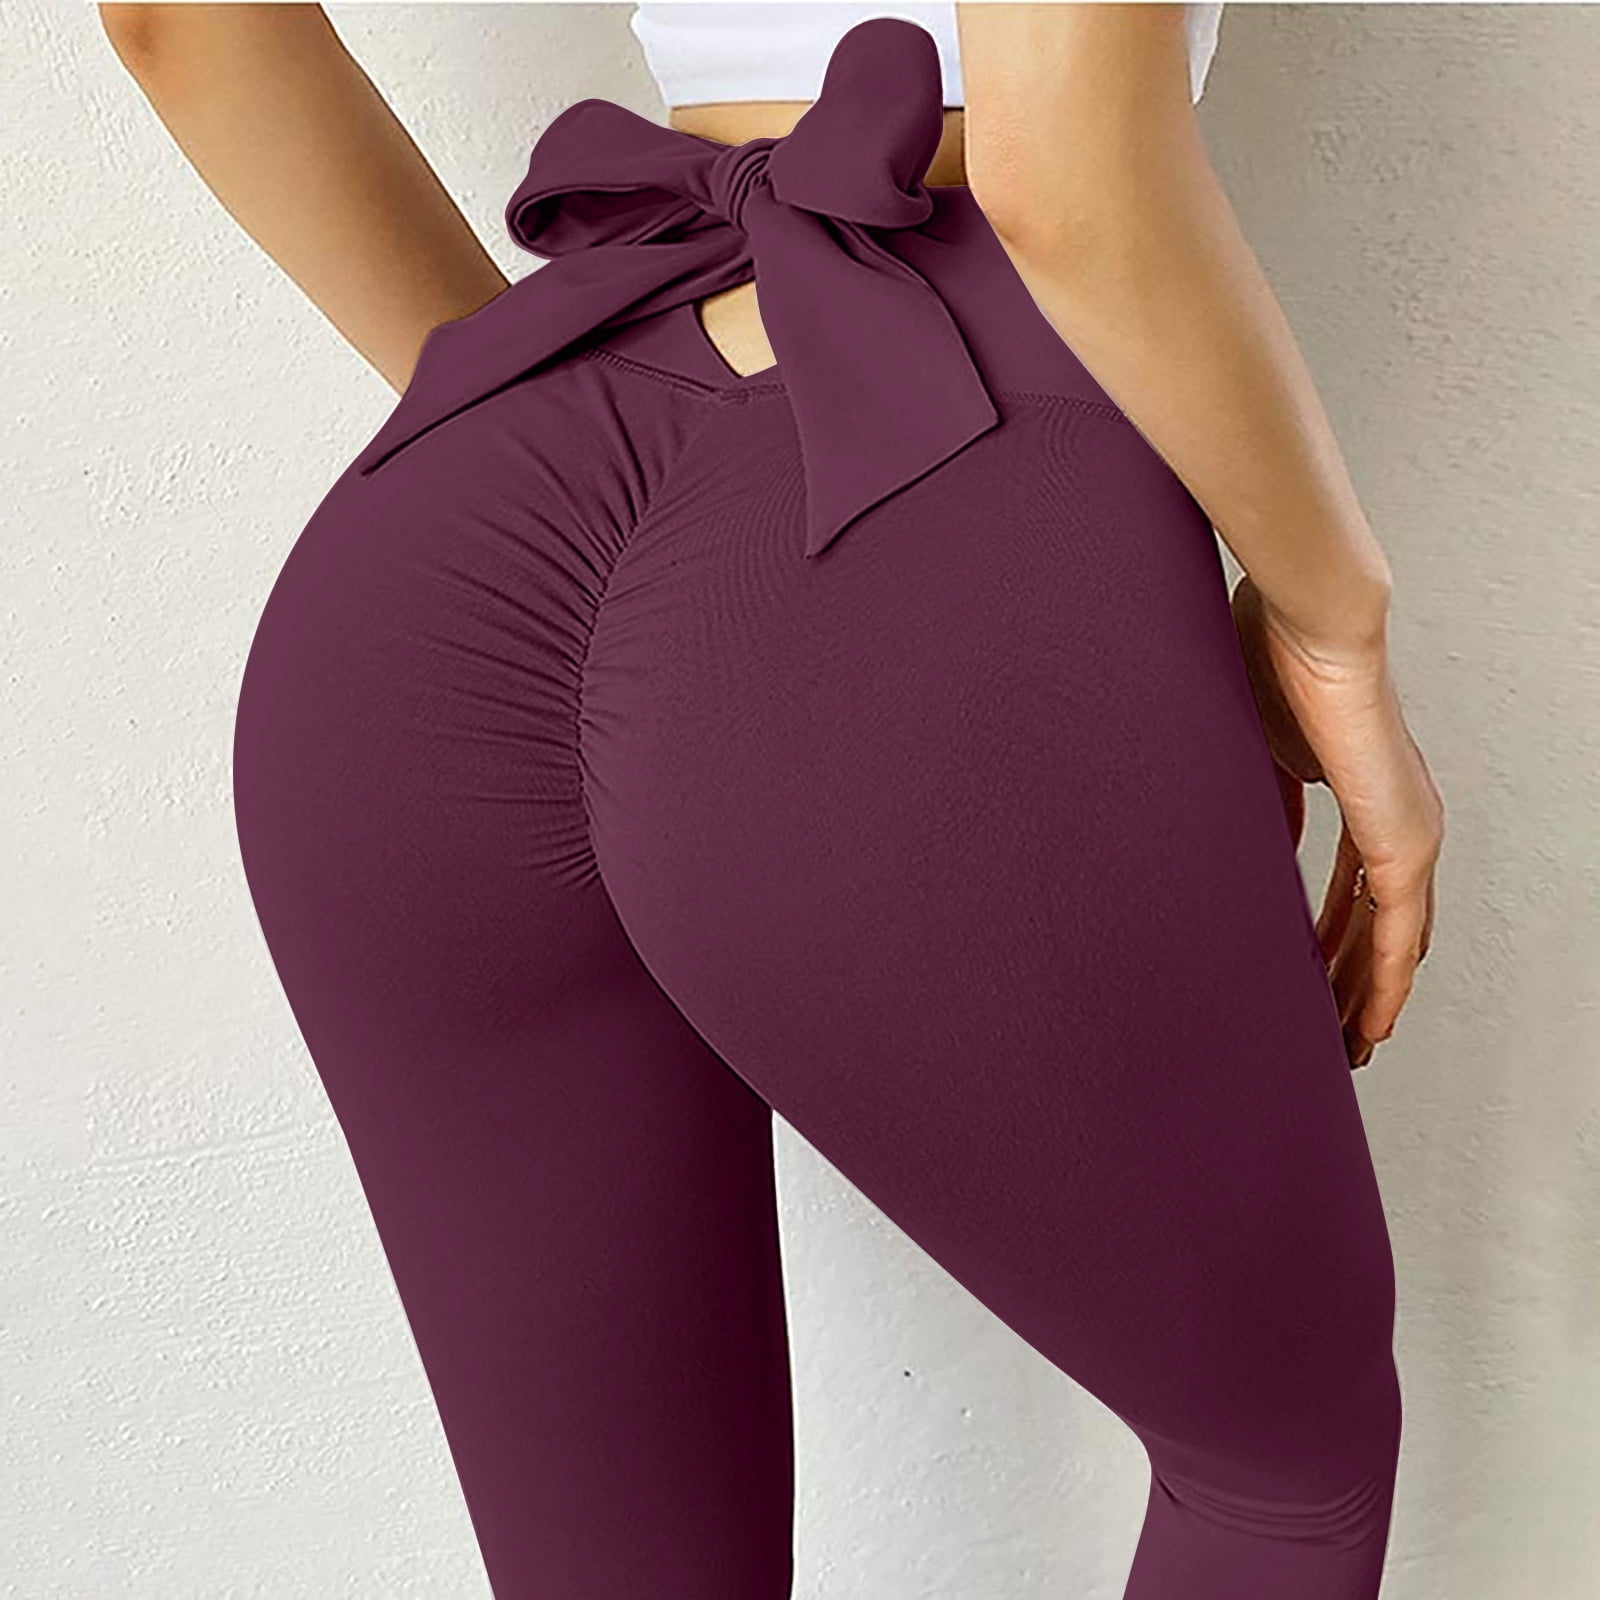 Hfyihgf Leggings for Women High Waist Tummy Control Yoga Pants Back Tie Bow  Hip Lift Workout Fitness Running Tights(Wine,M) 